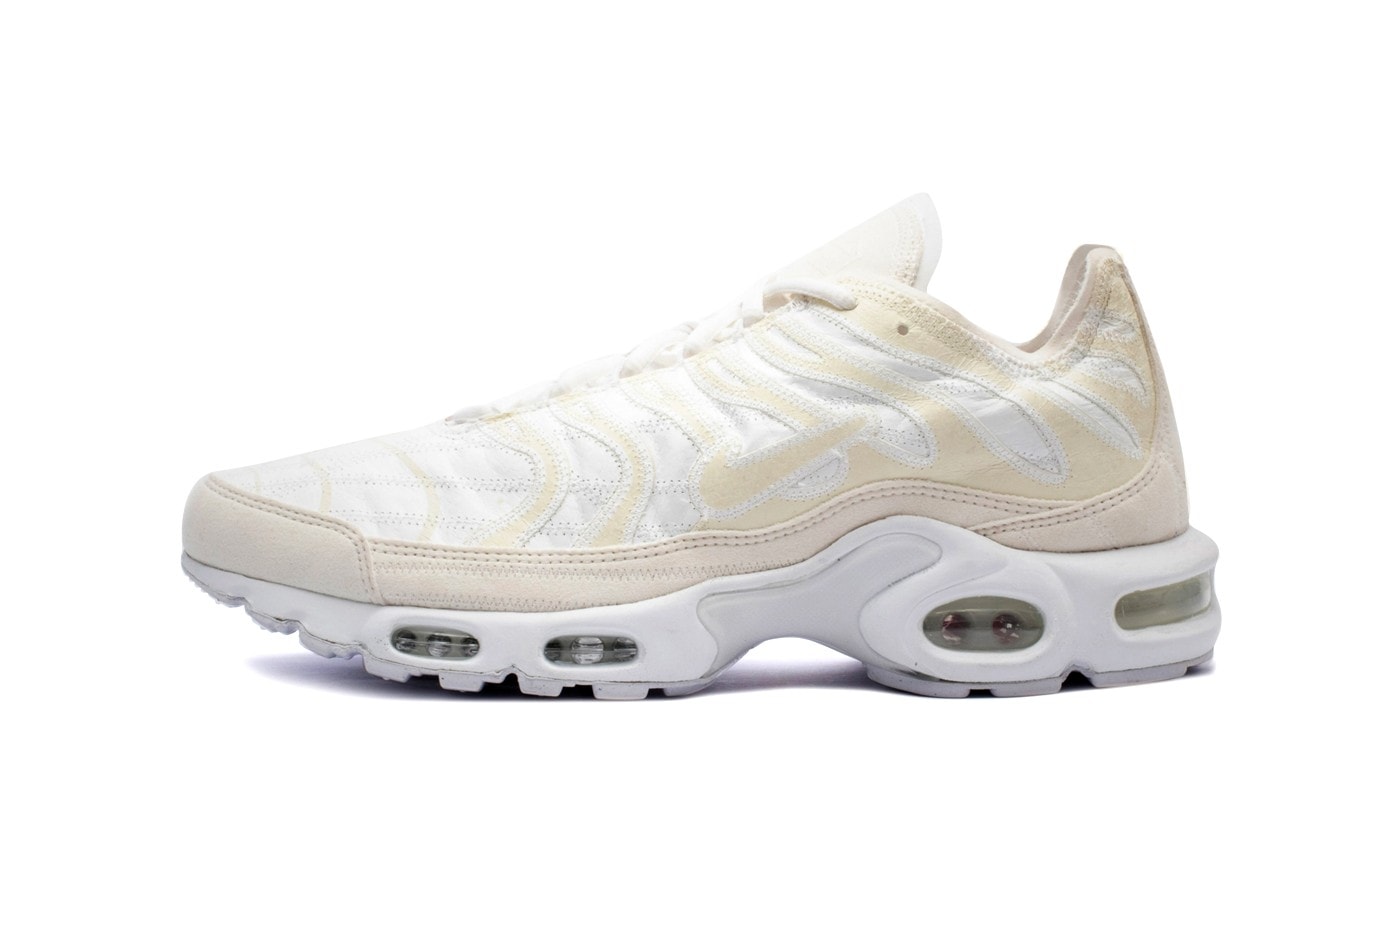 Nike Air Max Plus Deconstructed 全新配色「Beige/White」發佈